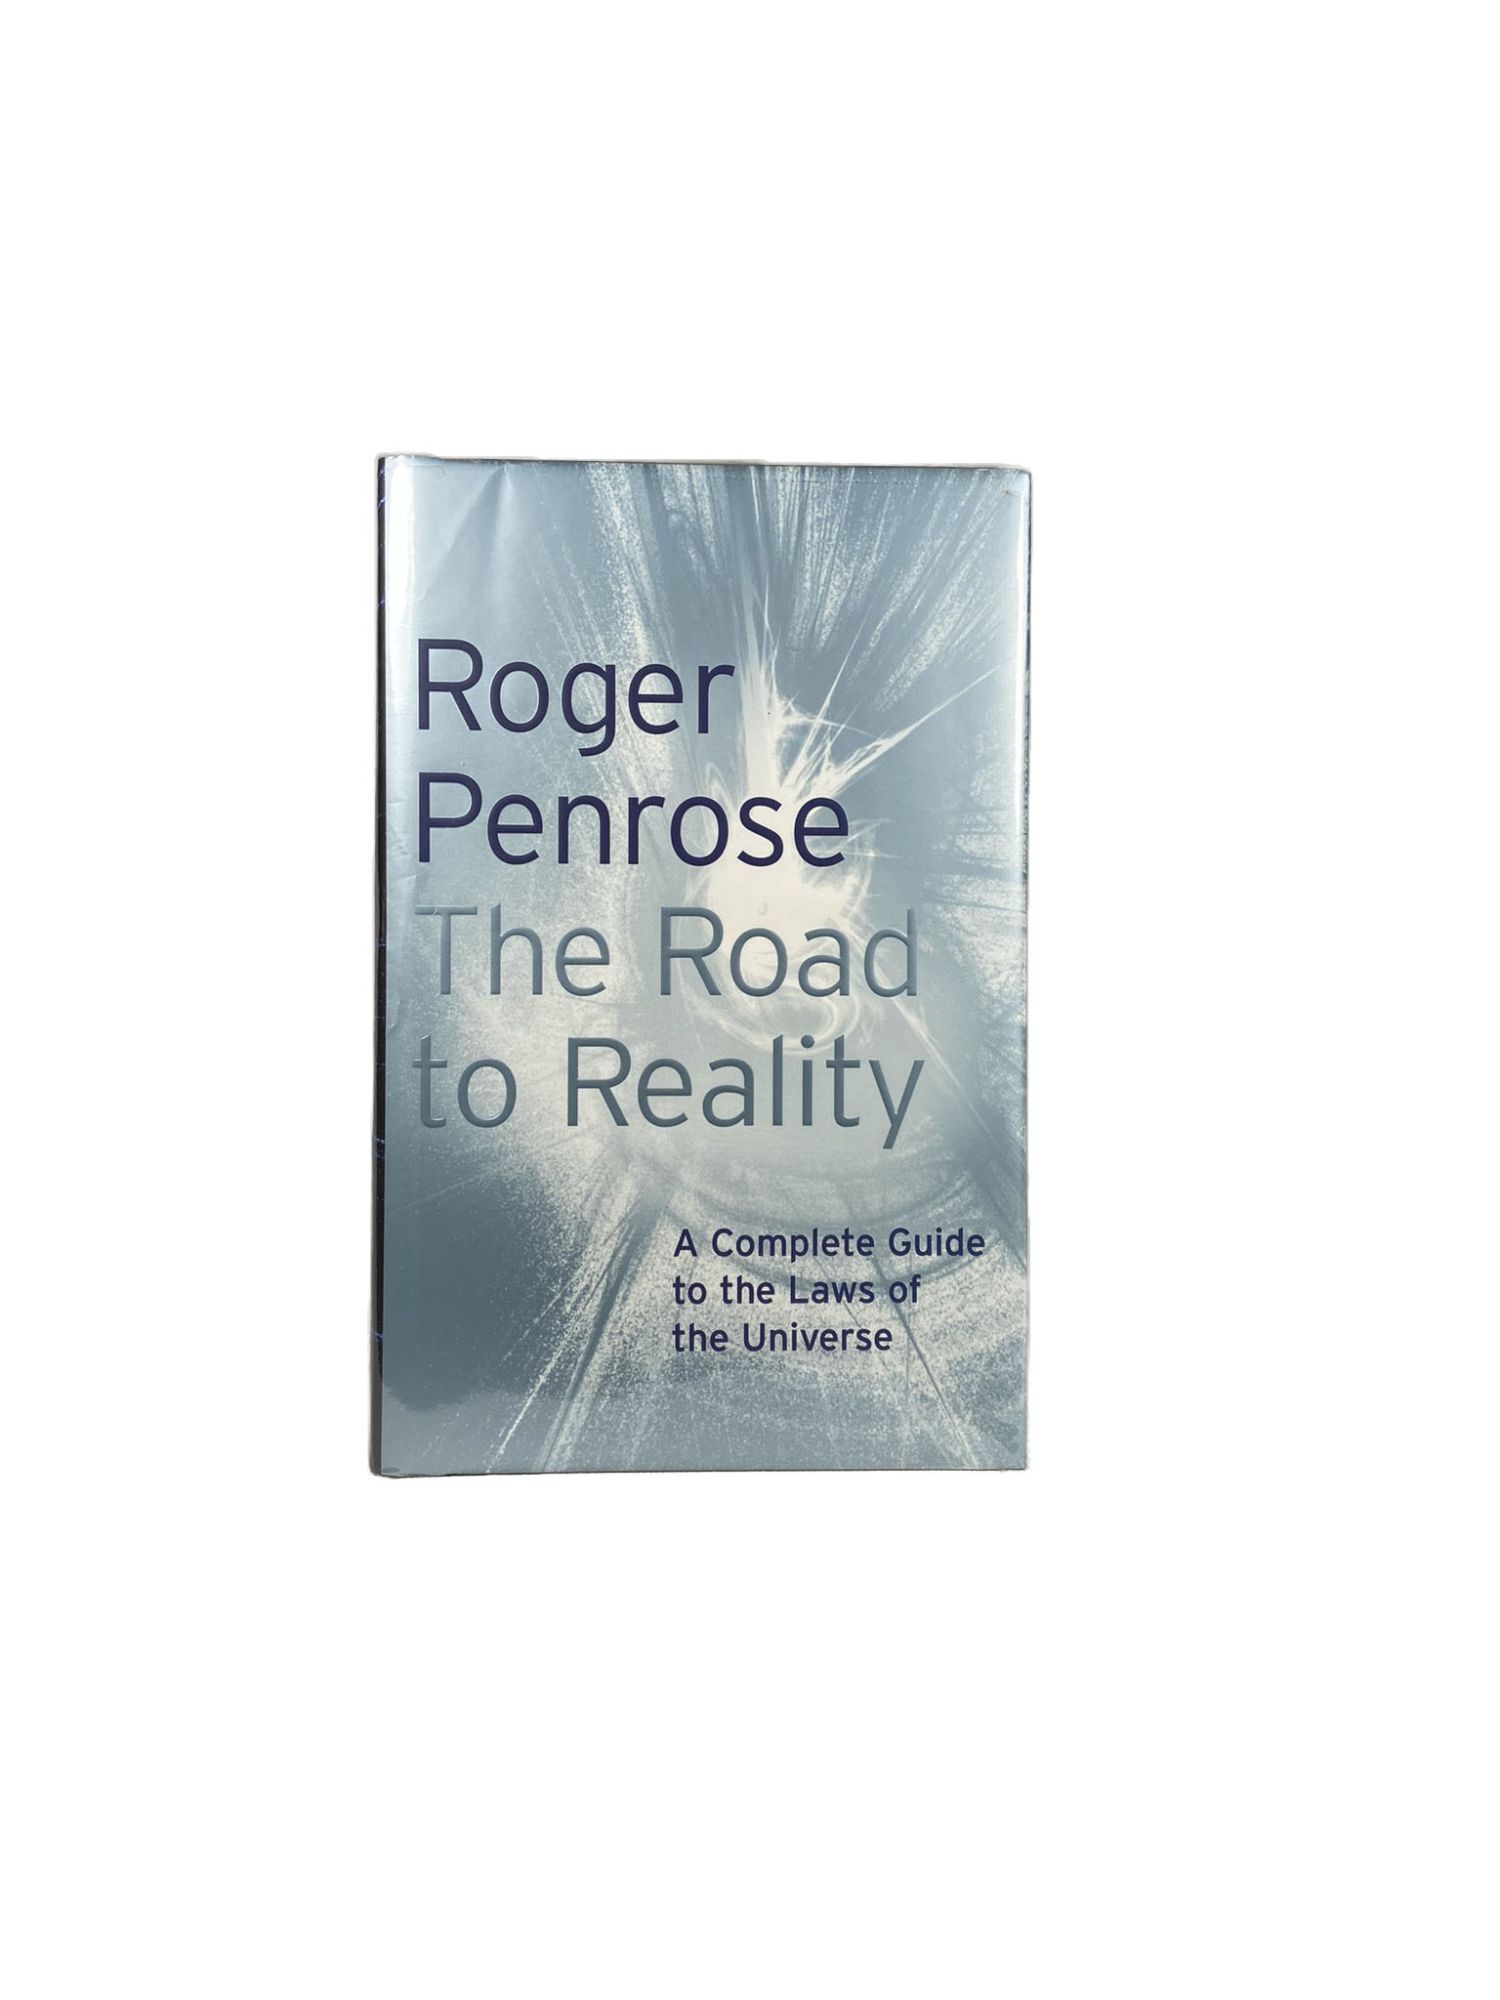 The Road to Reality by PENROSE, Roger: Fine (2004) First Edition ...